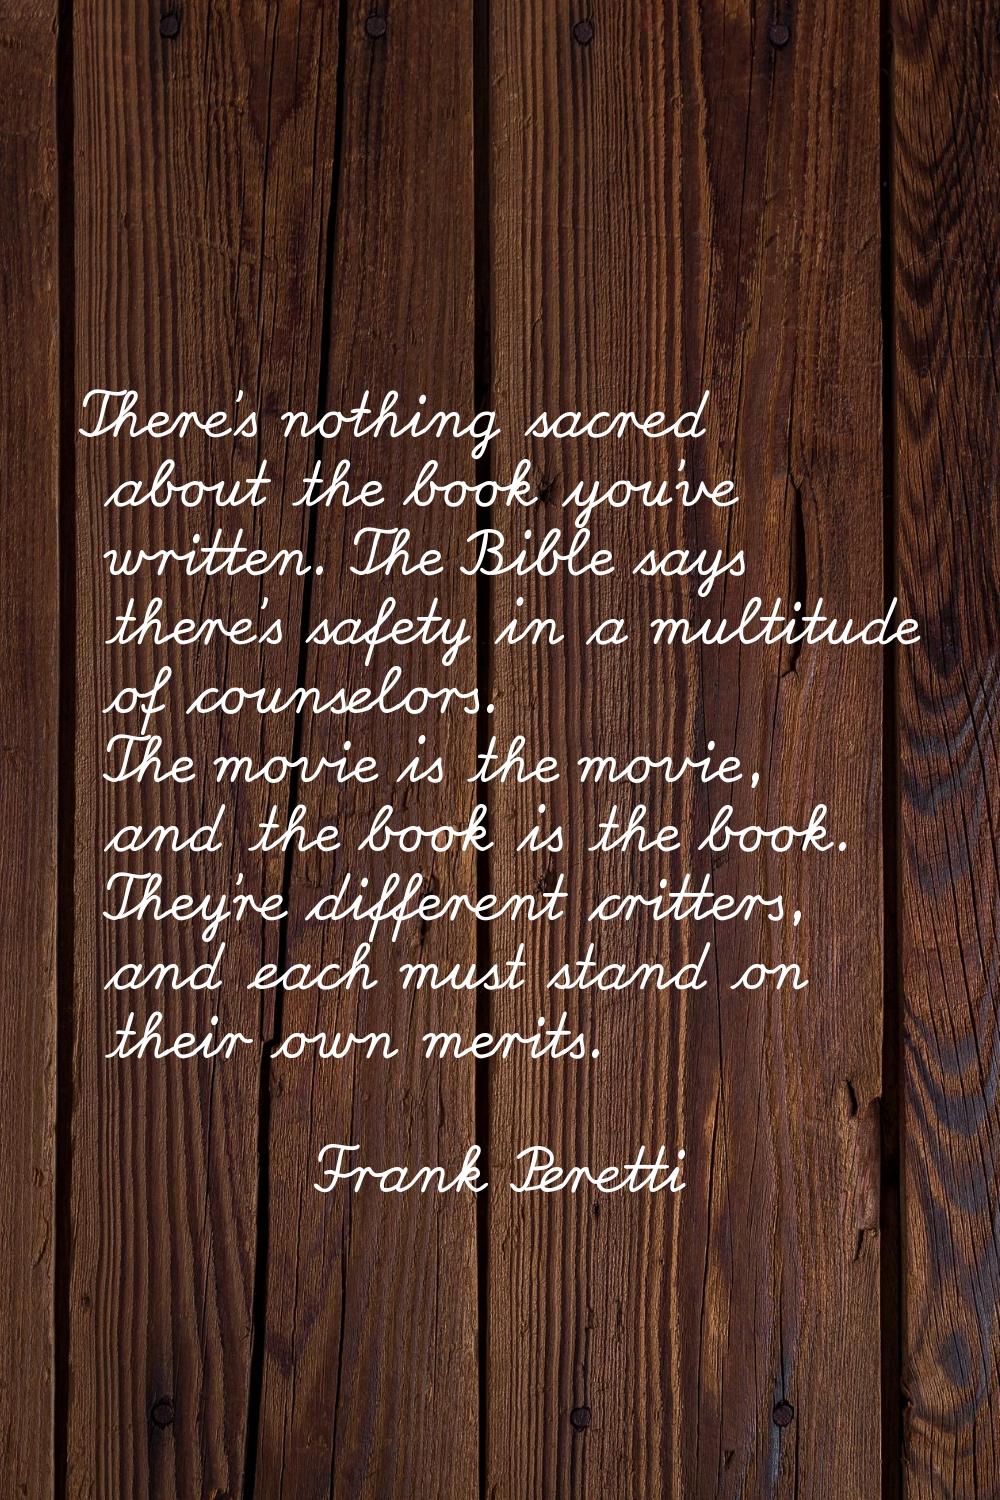 There's nothing sacred about the book you've written. The Bible says there's safety in a multitude 